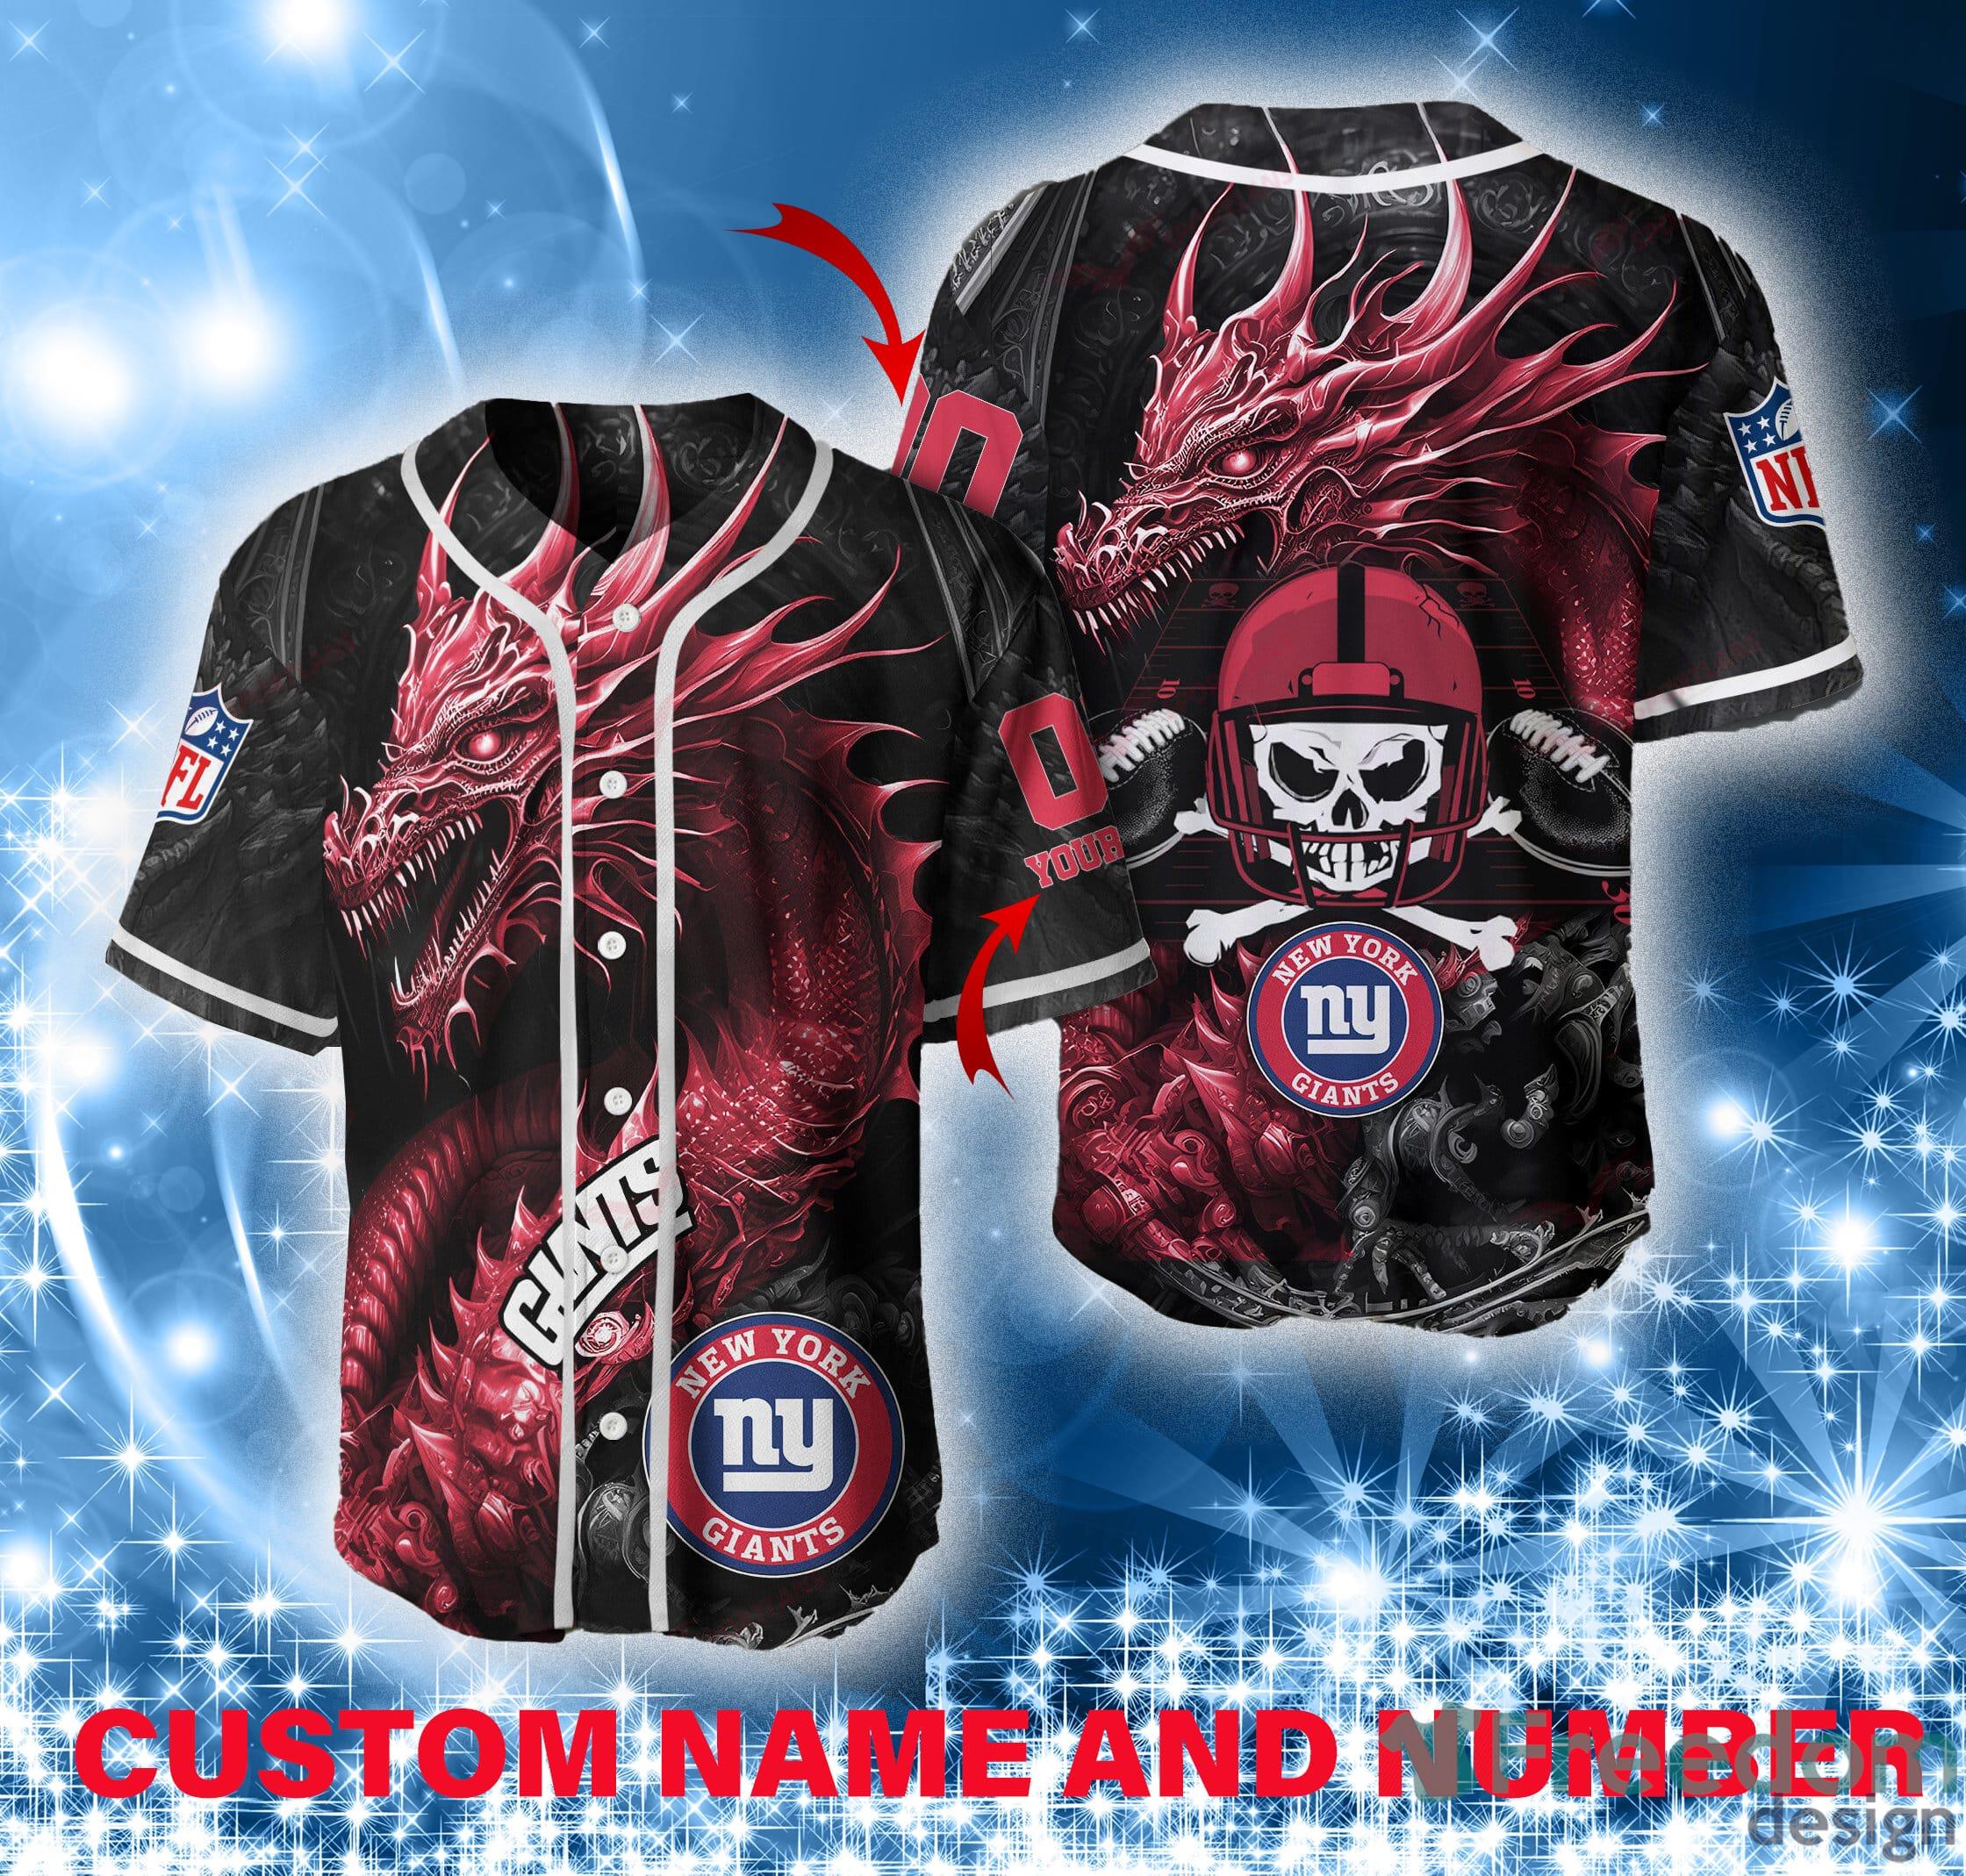 New York Giants Personalized Name And Number NFL Baseball Jersey Shirt